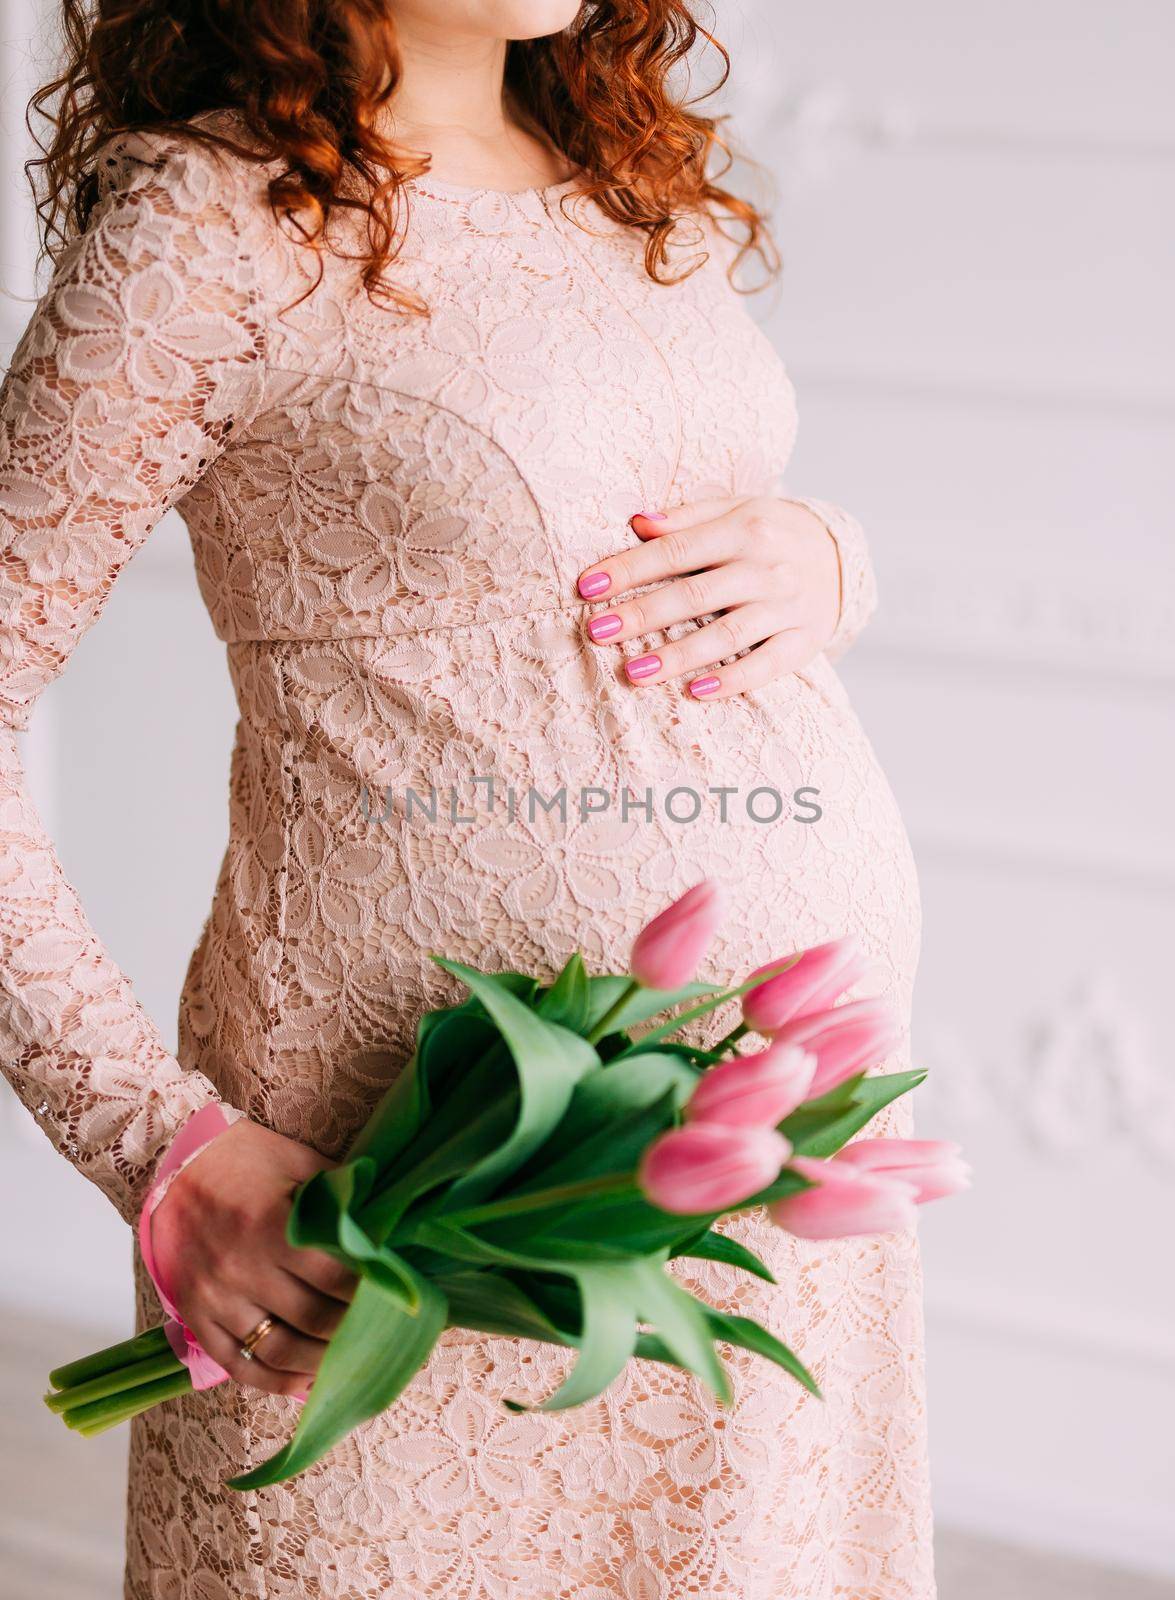 Belly of pregnant girl and tulips in hands